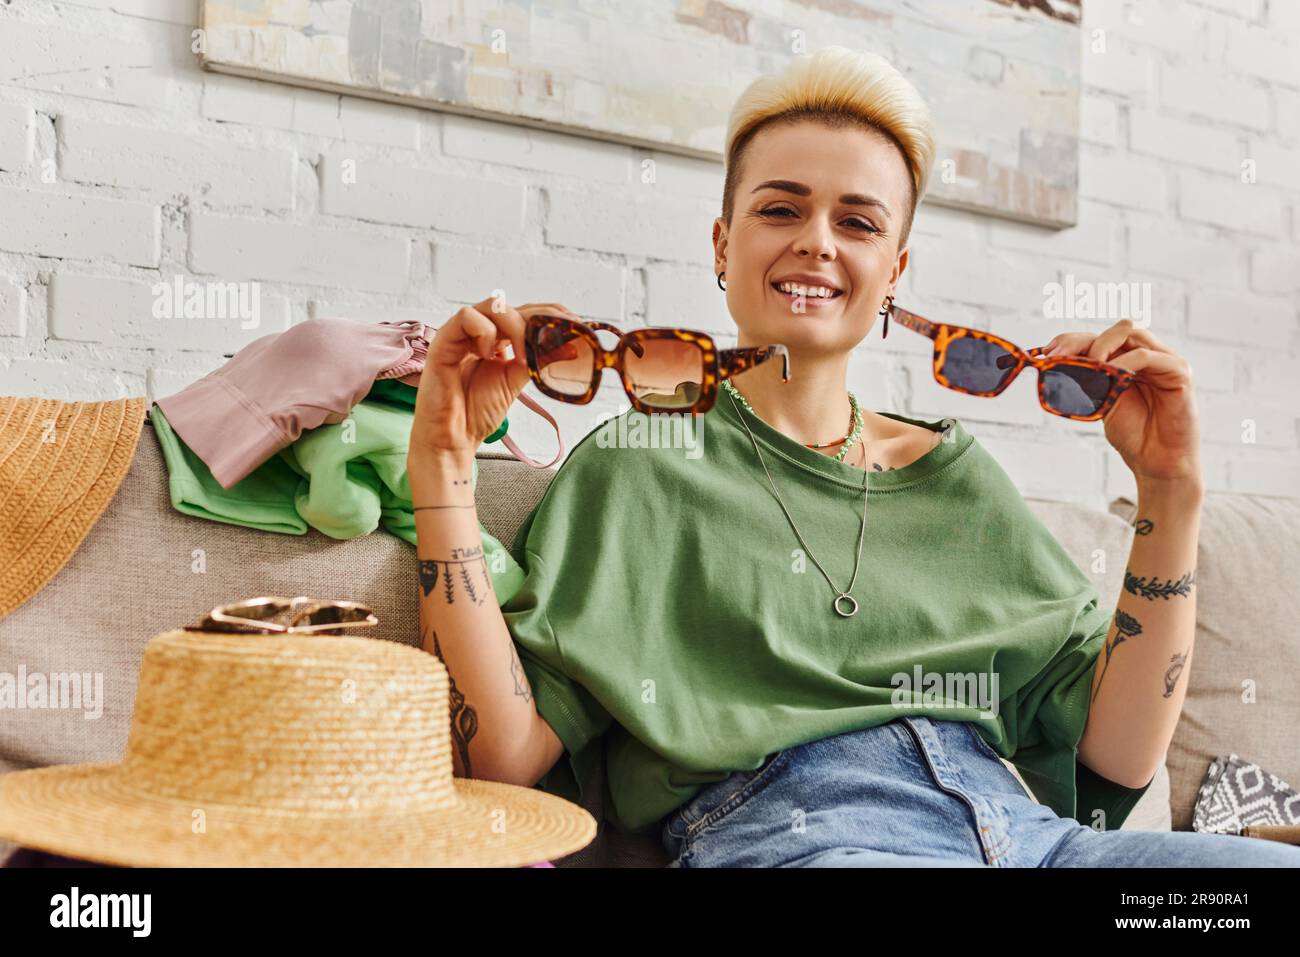 happy young woman sitting on couch near straw hat and clothing while showing stylish sunglasses, trendy hairstyle, tattoo, sustainable living and mind Stock Photo